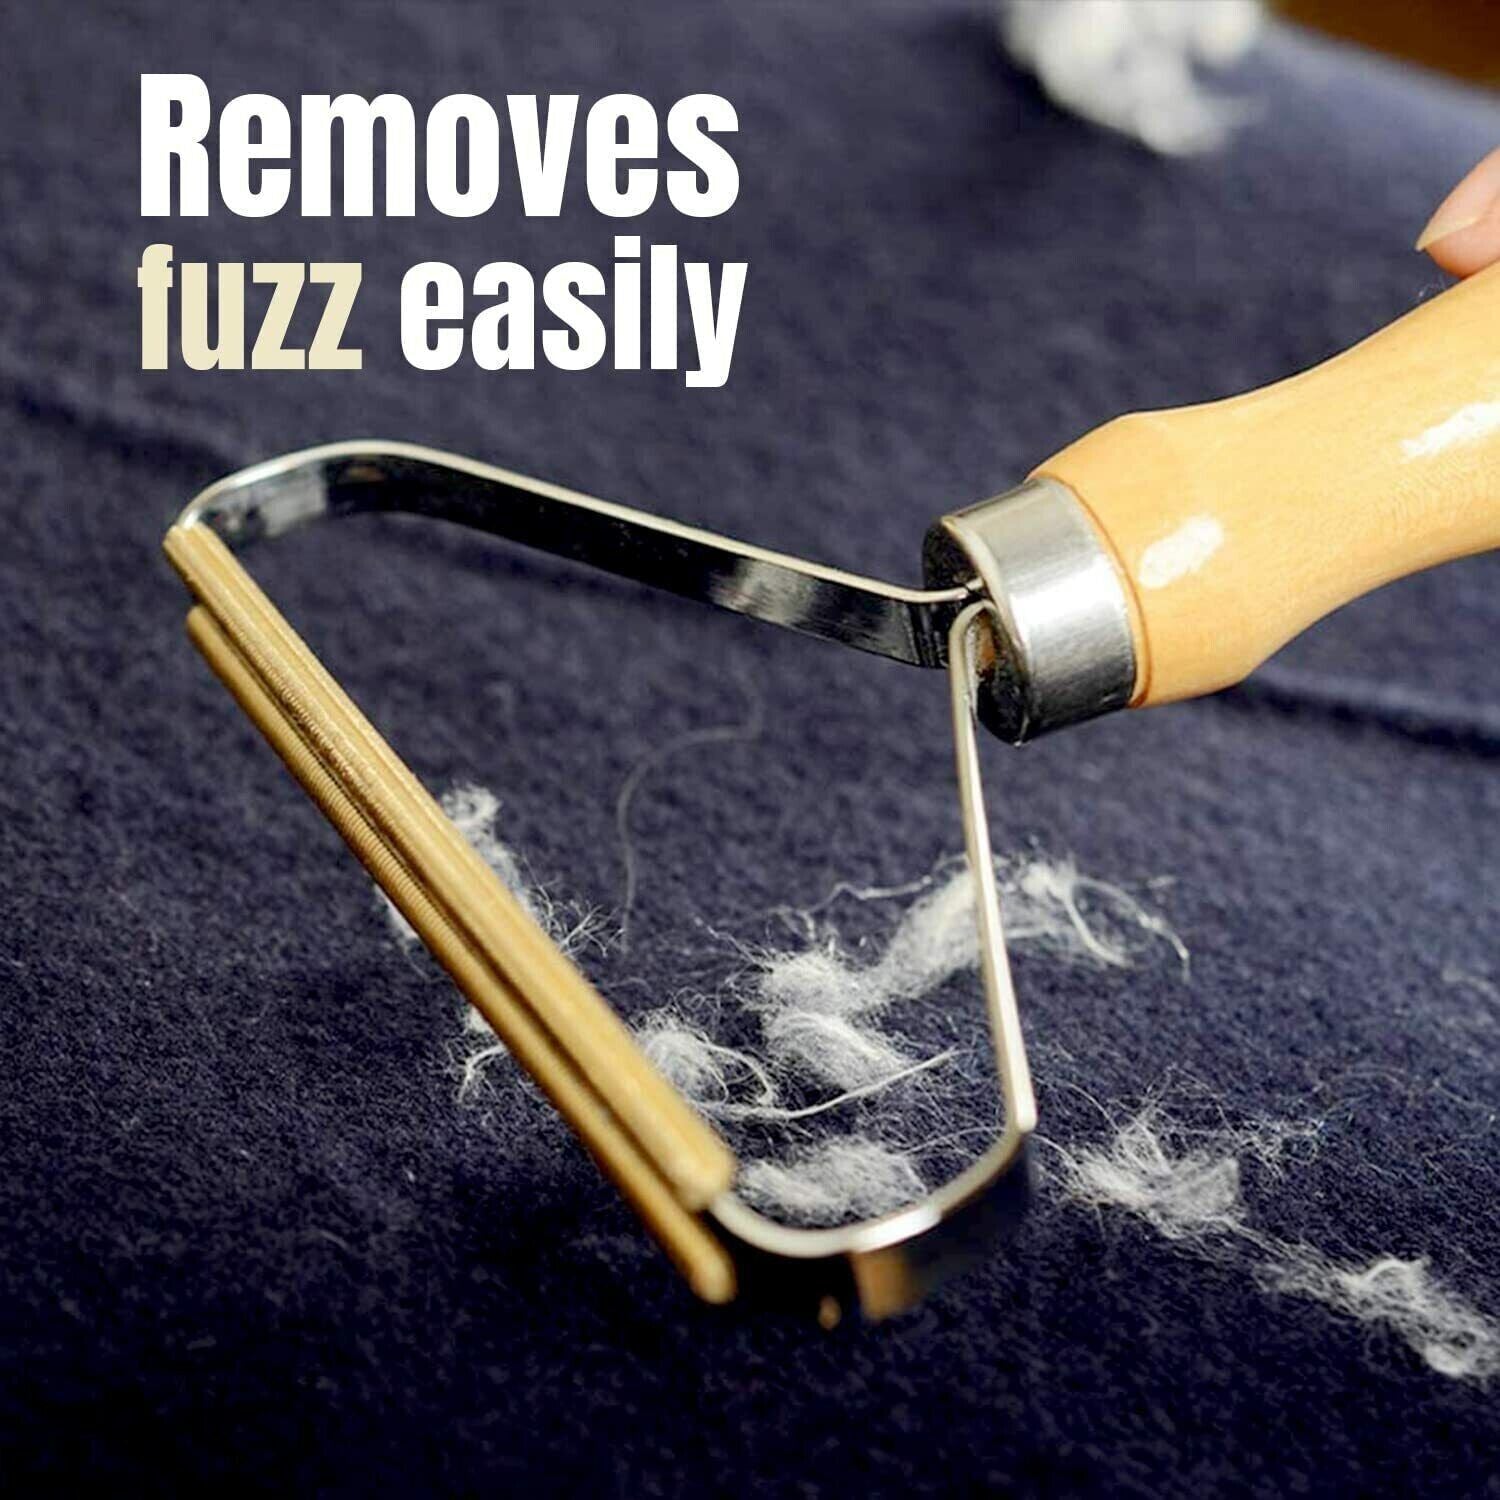 Lint Remover Tips and Tricks: Say Goodbye to Fuzzy Clothes